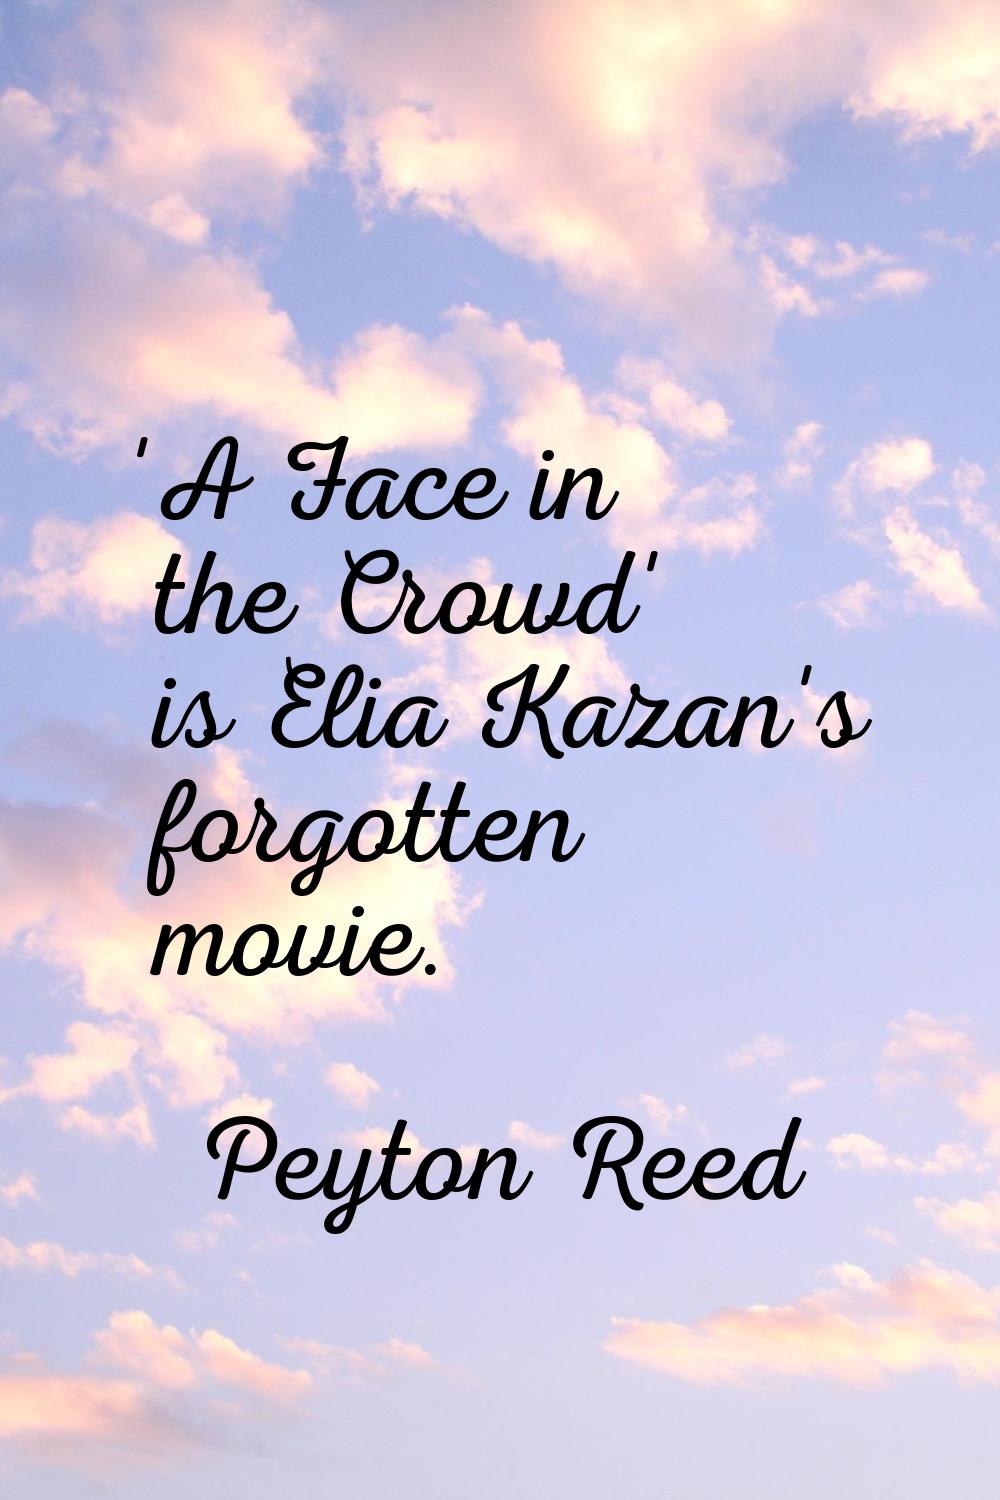 'A Face in the Crowd' is Elia Kazan's forgotten movie.